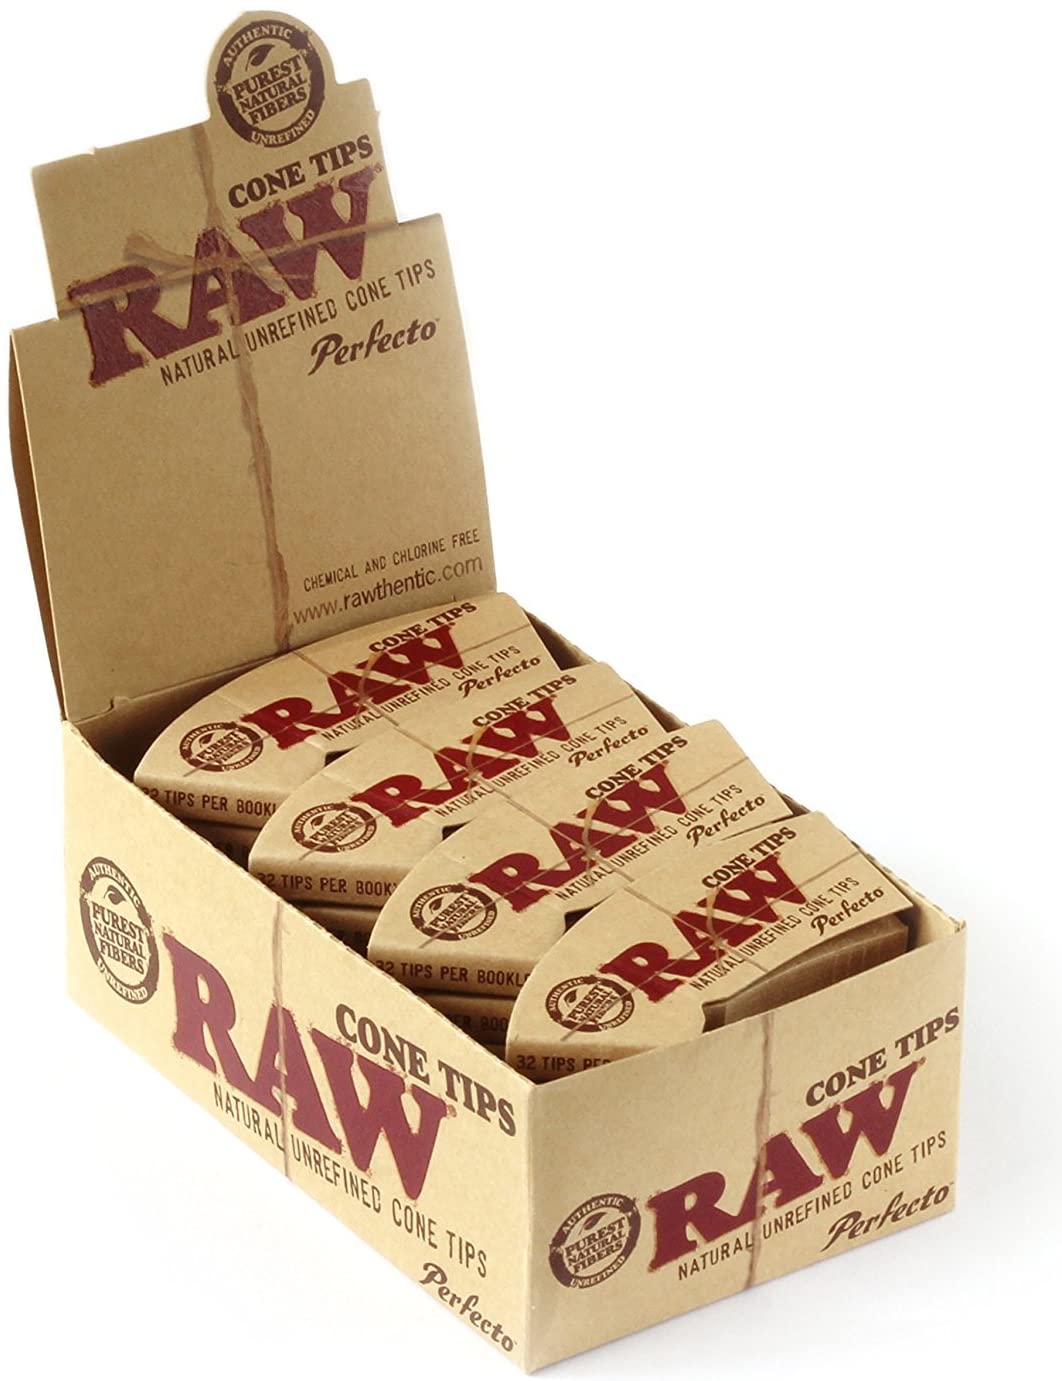 Raw Perfecto Cone Tips - Pack of 24 - Smoker's World of Hollywood